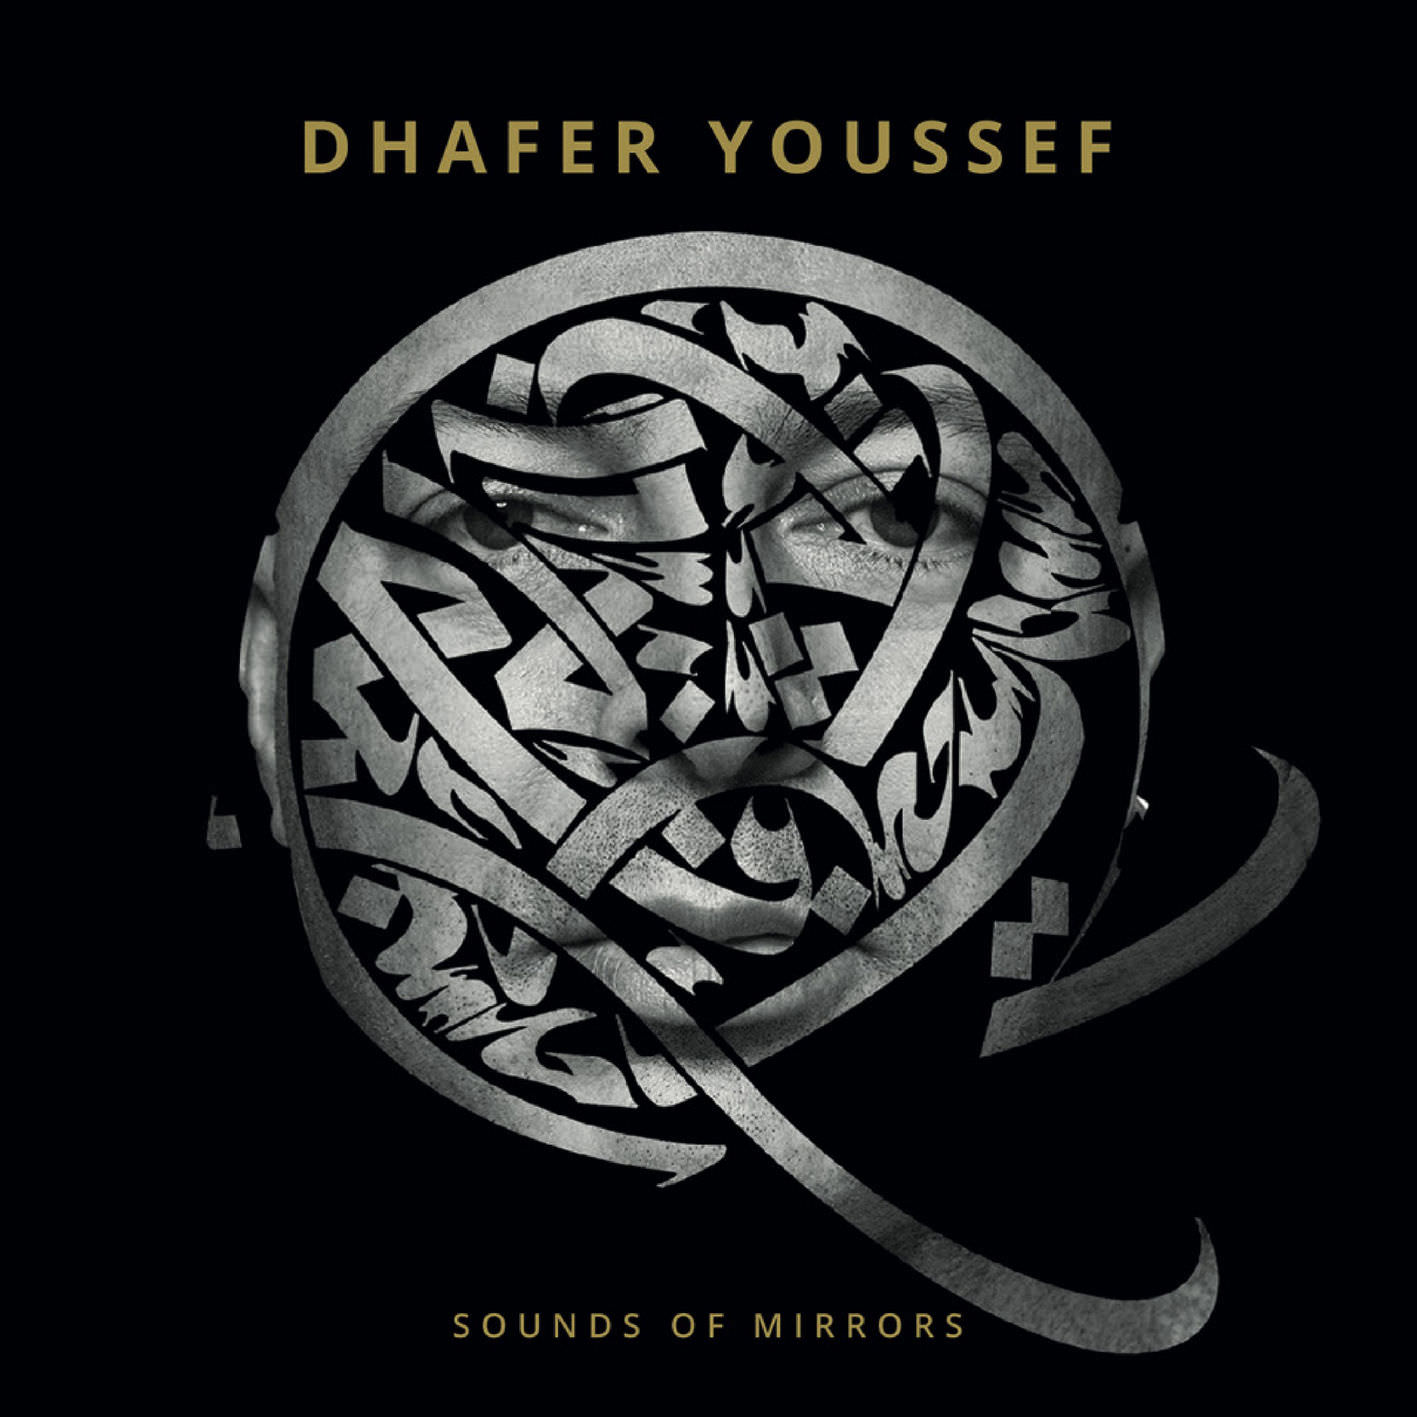 Dhafer Youssef – Sounds Of Mirrors (2018) [FLAC 24bit/96kHz]